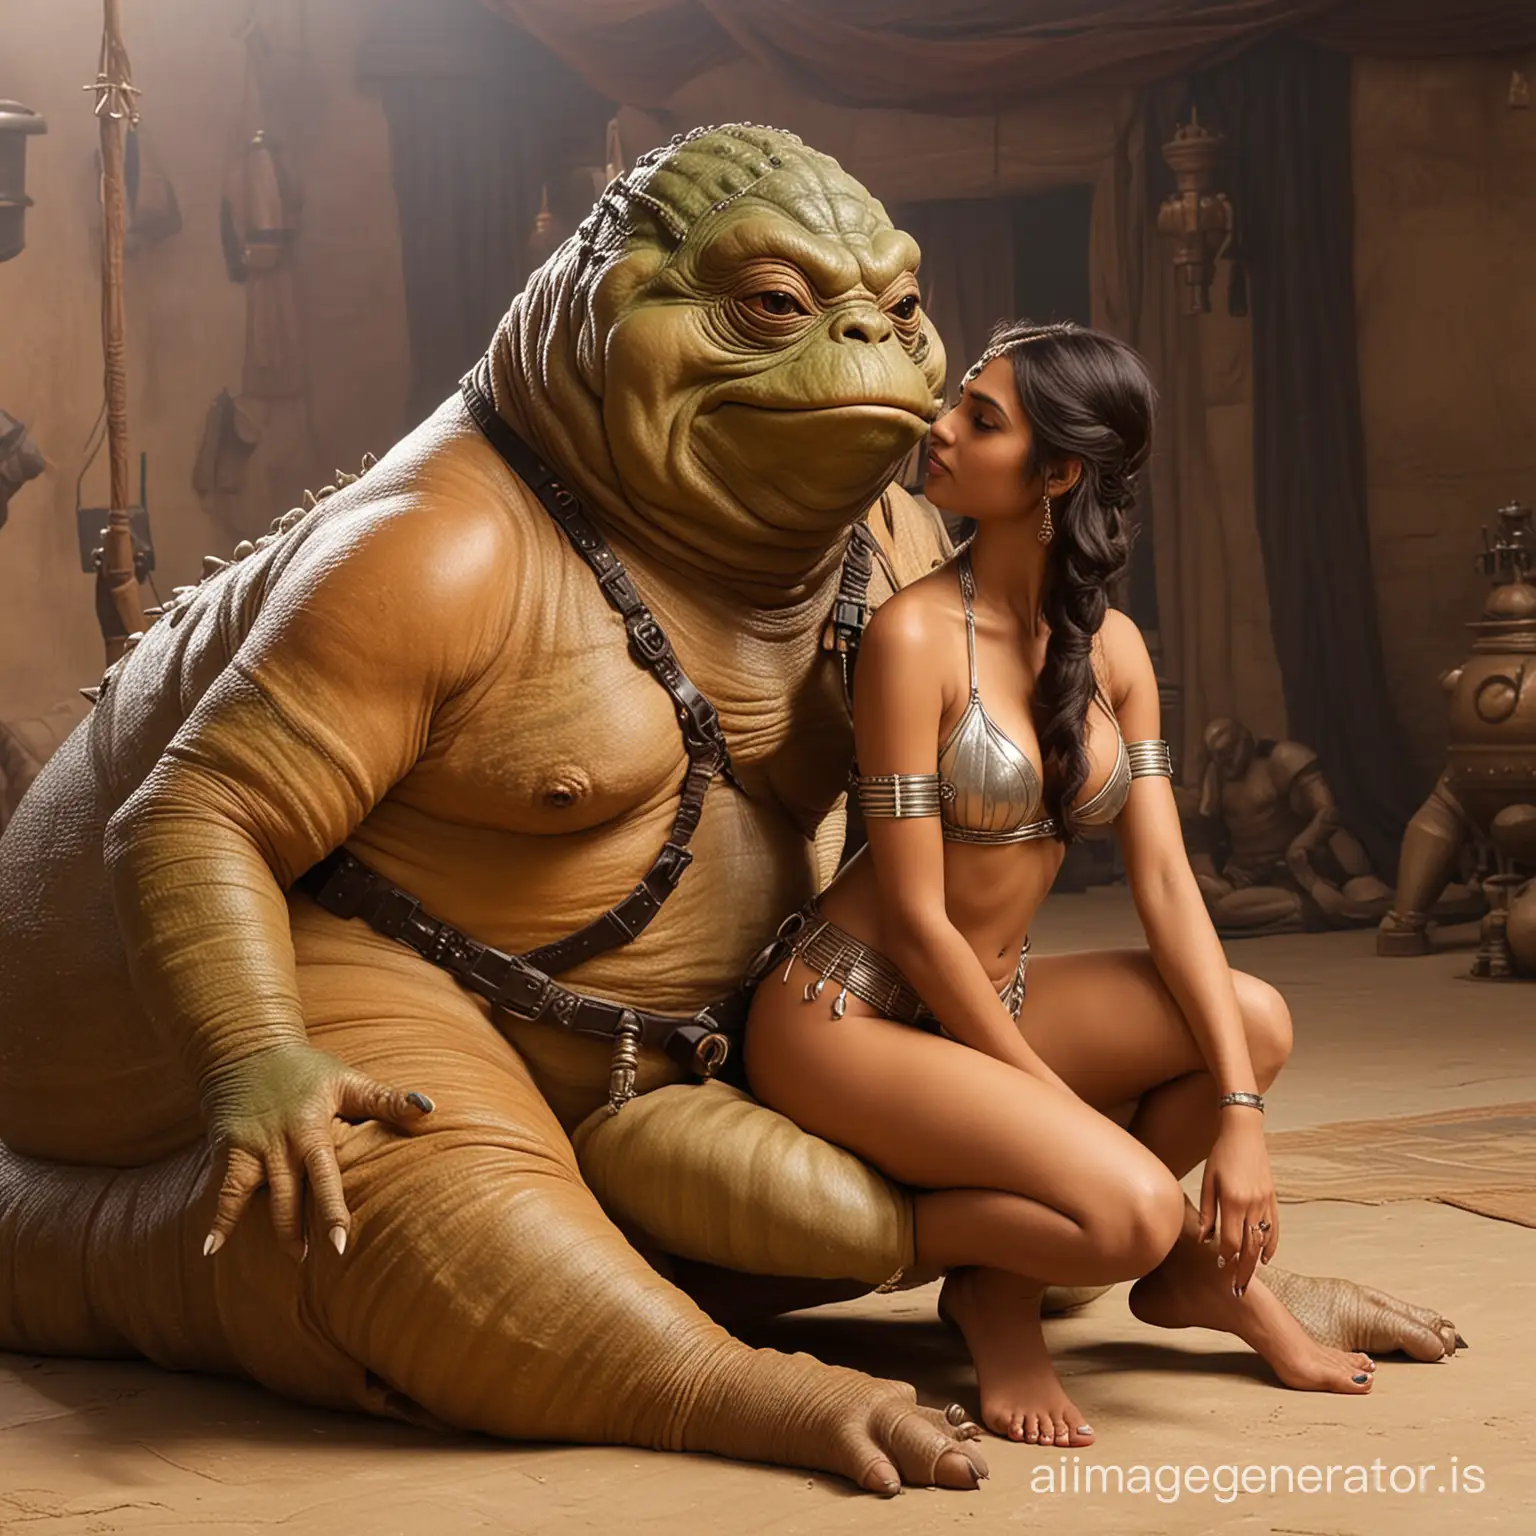 Jabba the Hutt forces his beautiful fit exotic Indian slave girl to kneel before him